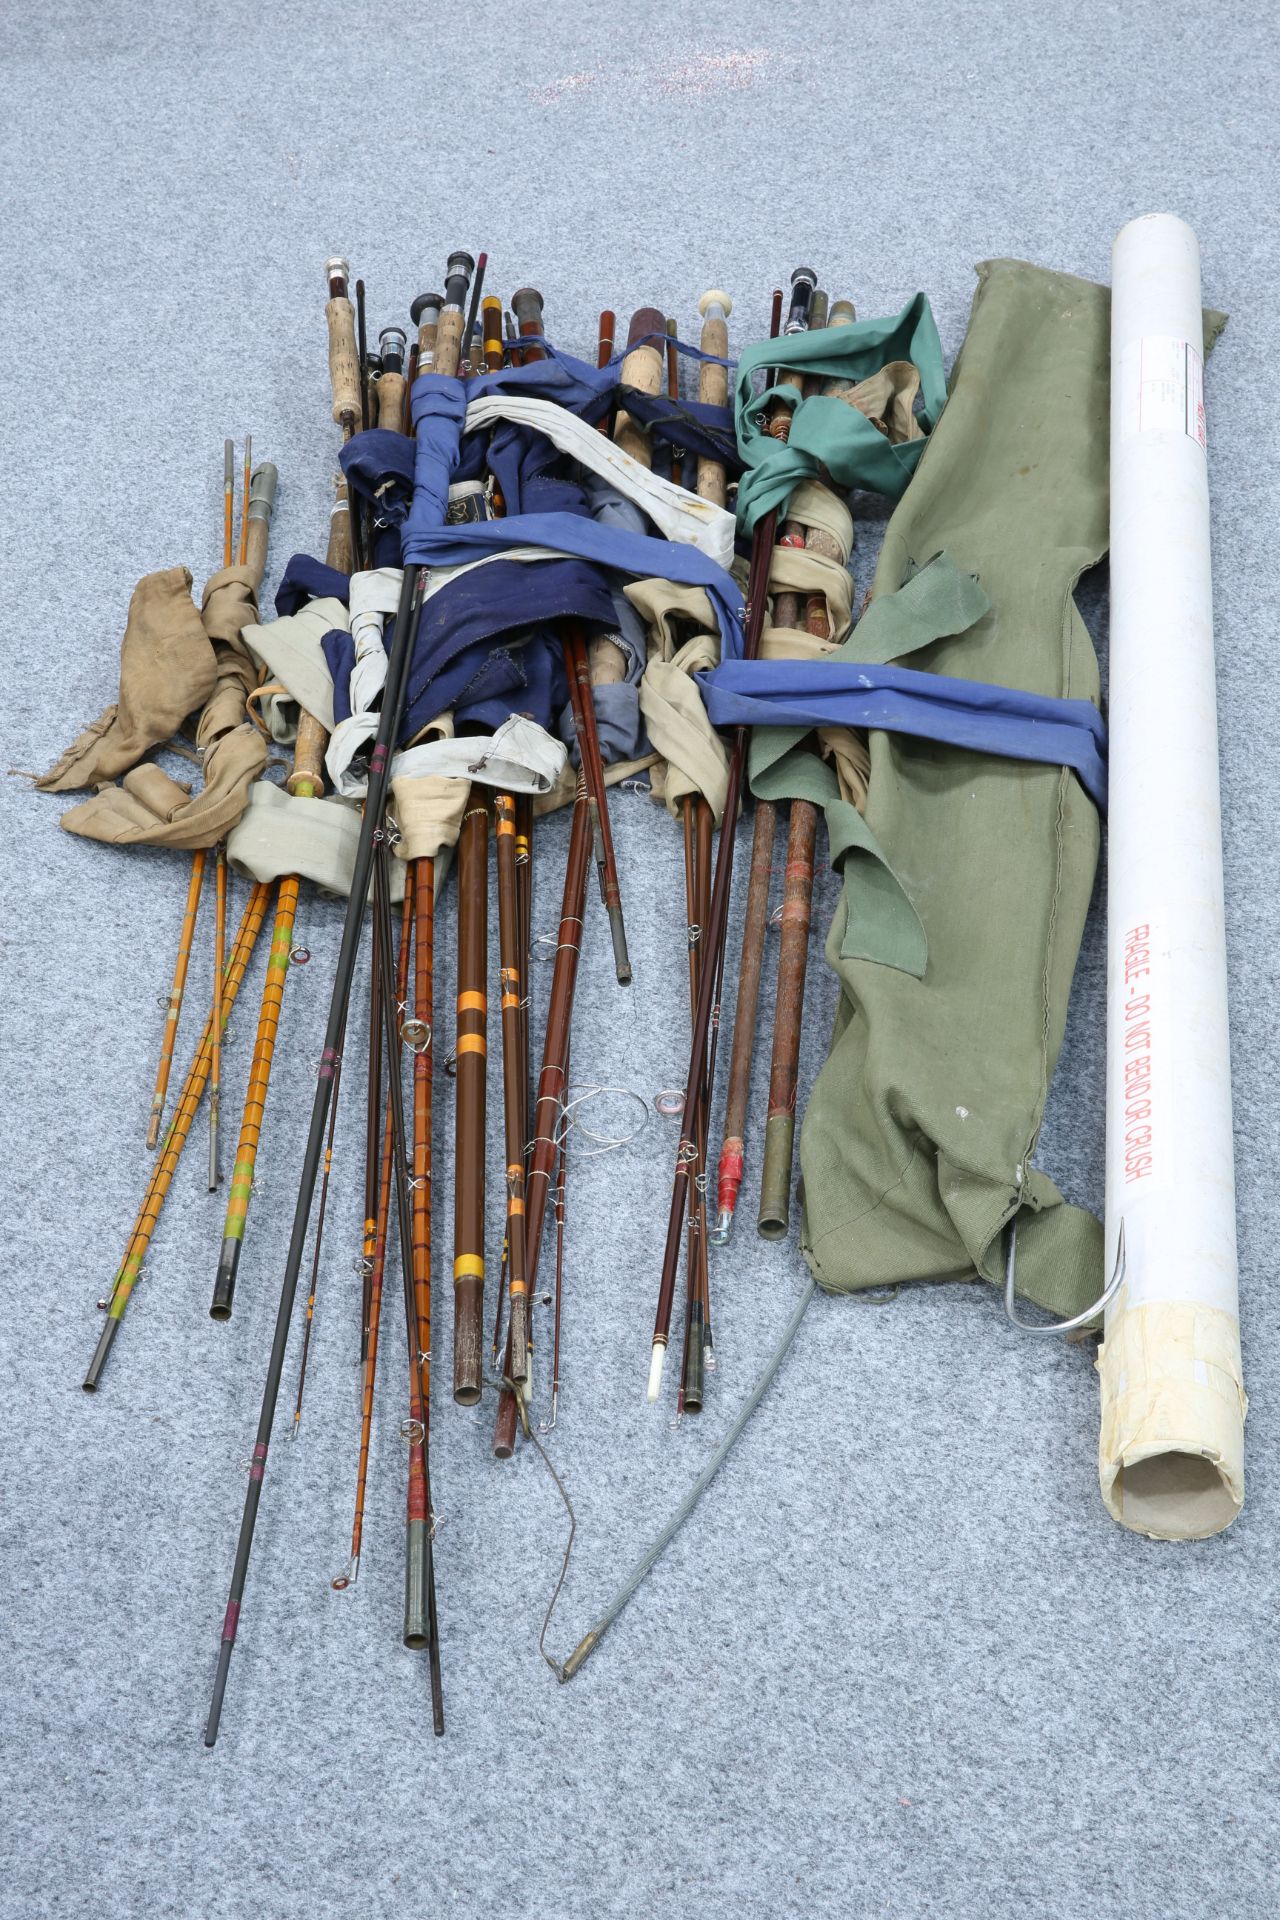 A COLLECTION OF OLD FISHING RODS AND OTHER TACKLE ITEMS